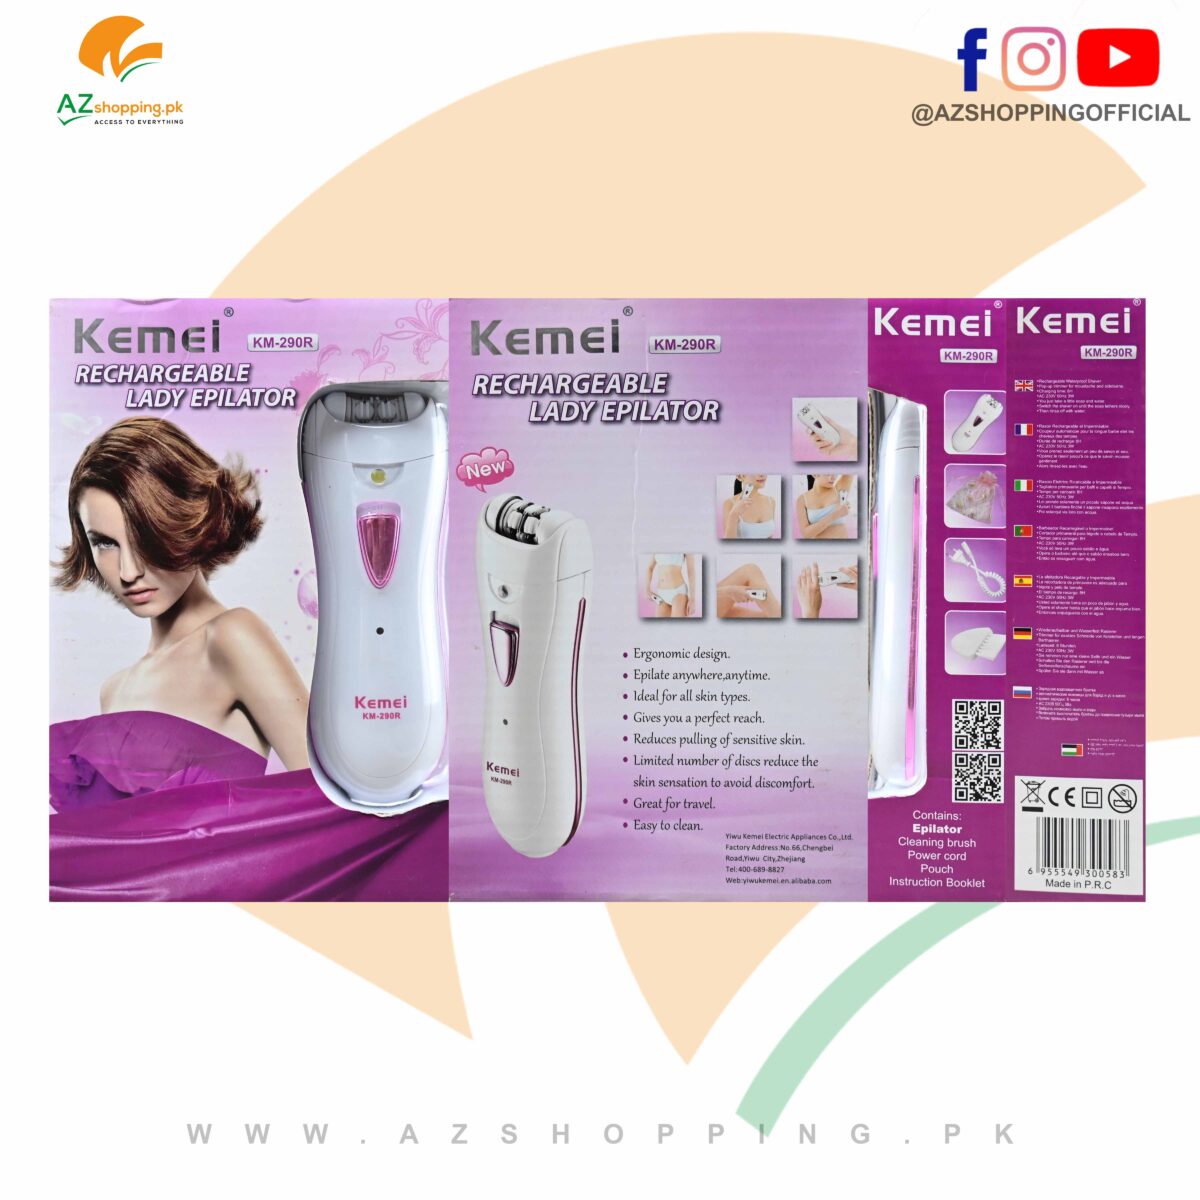 Kemei – Rechargeable Lady Epilator Waterproof Shaver with Pop-up Trimmer – Model: KM-290R